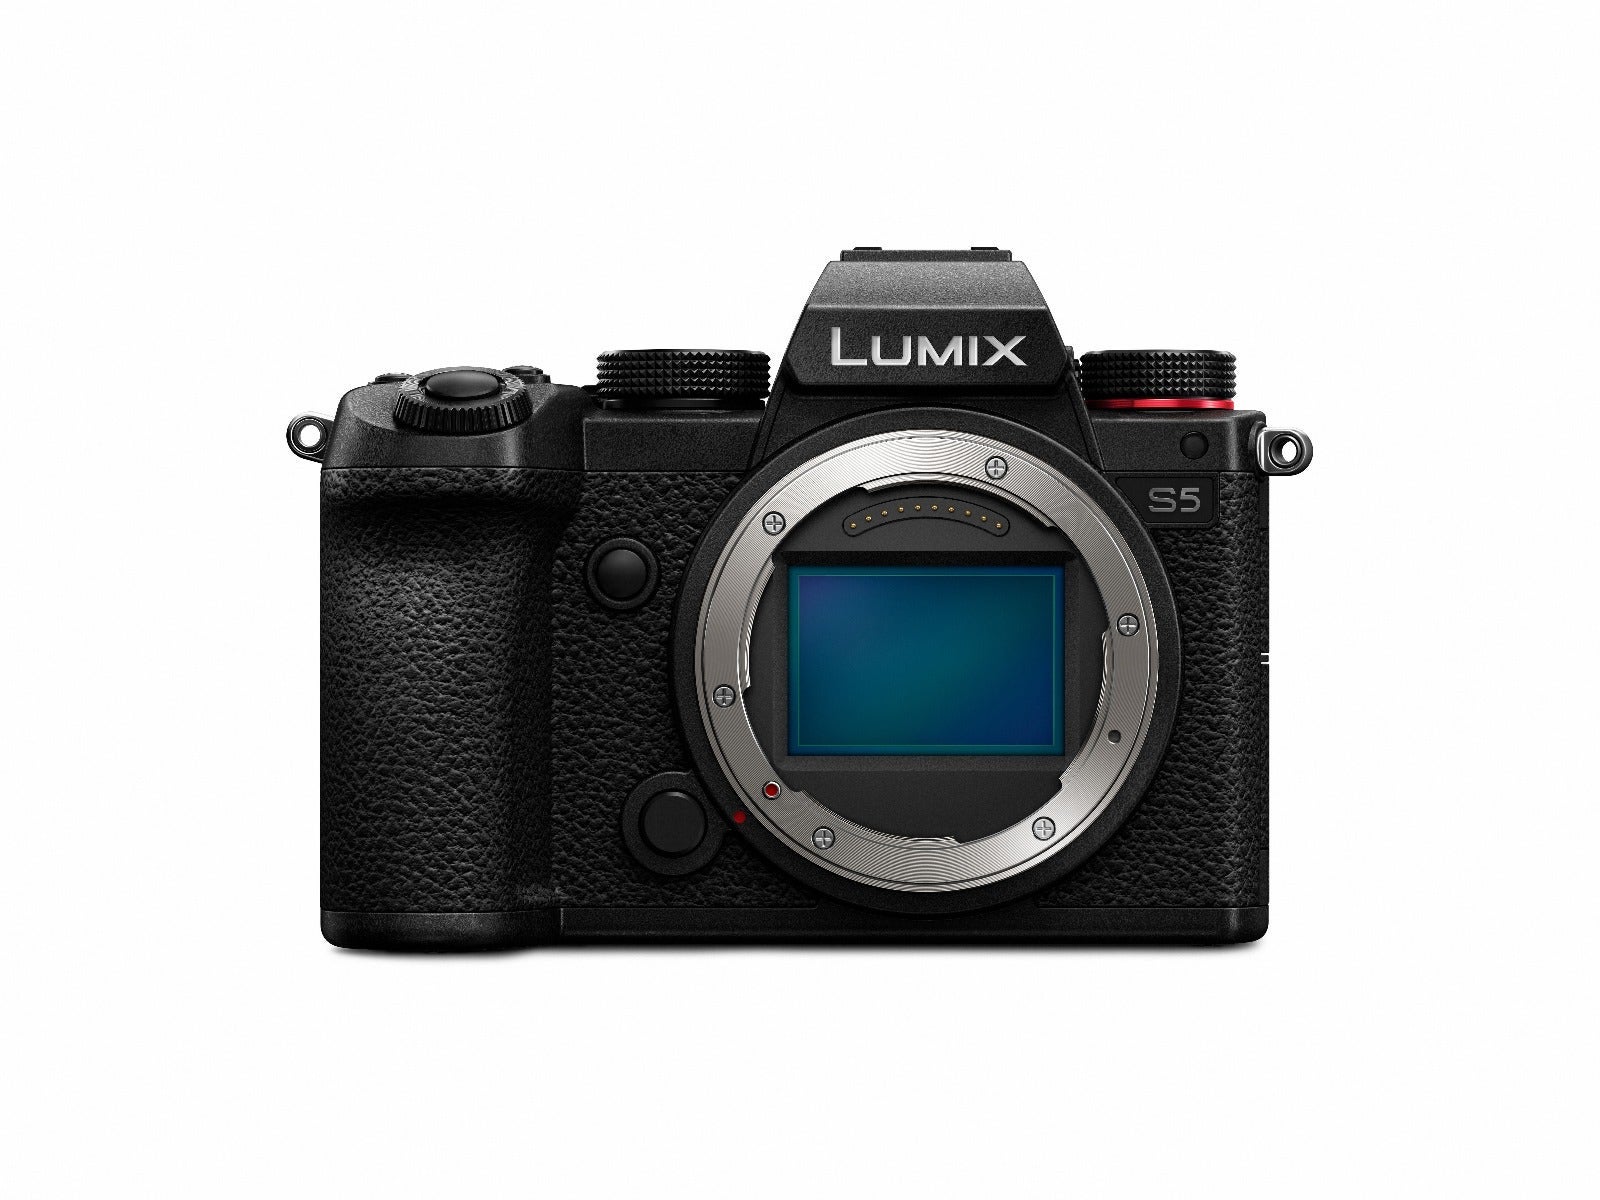 Image of Panasonic Lumix S5 Body Only Black Compact System Camera